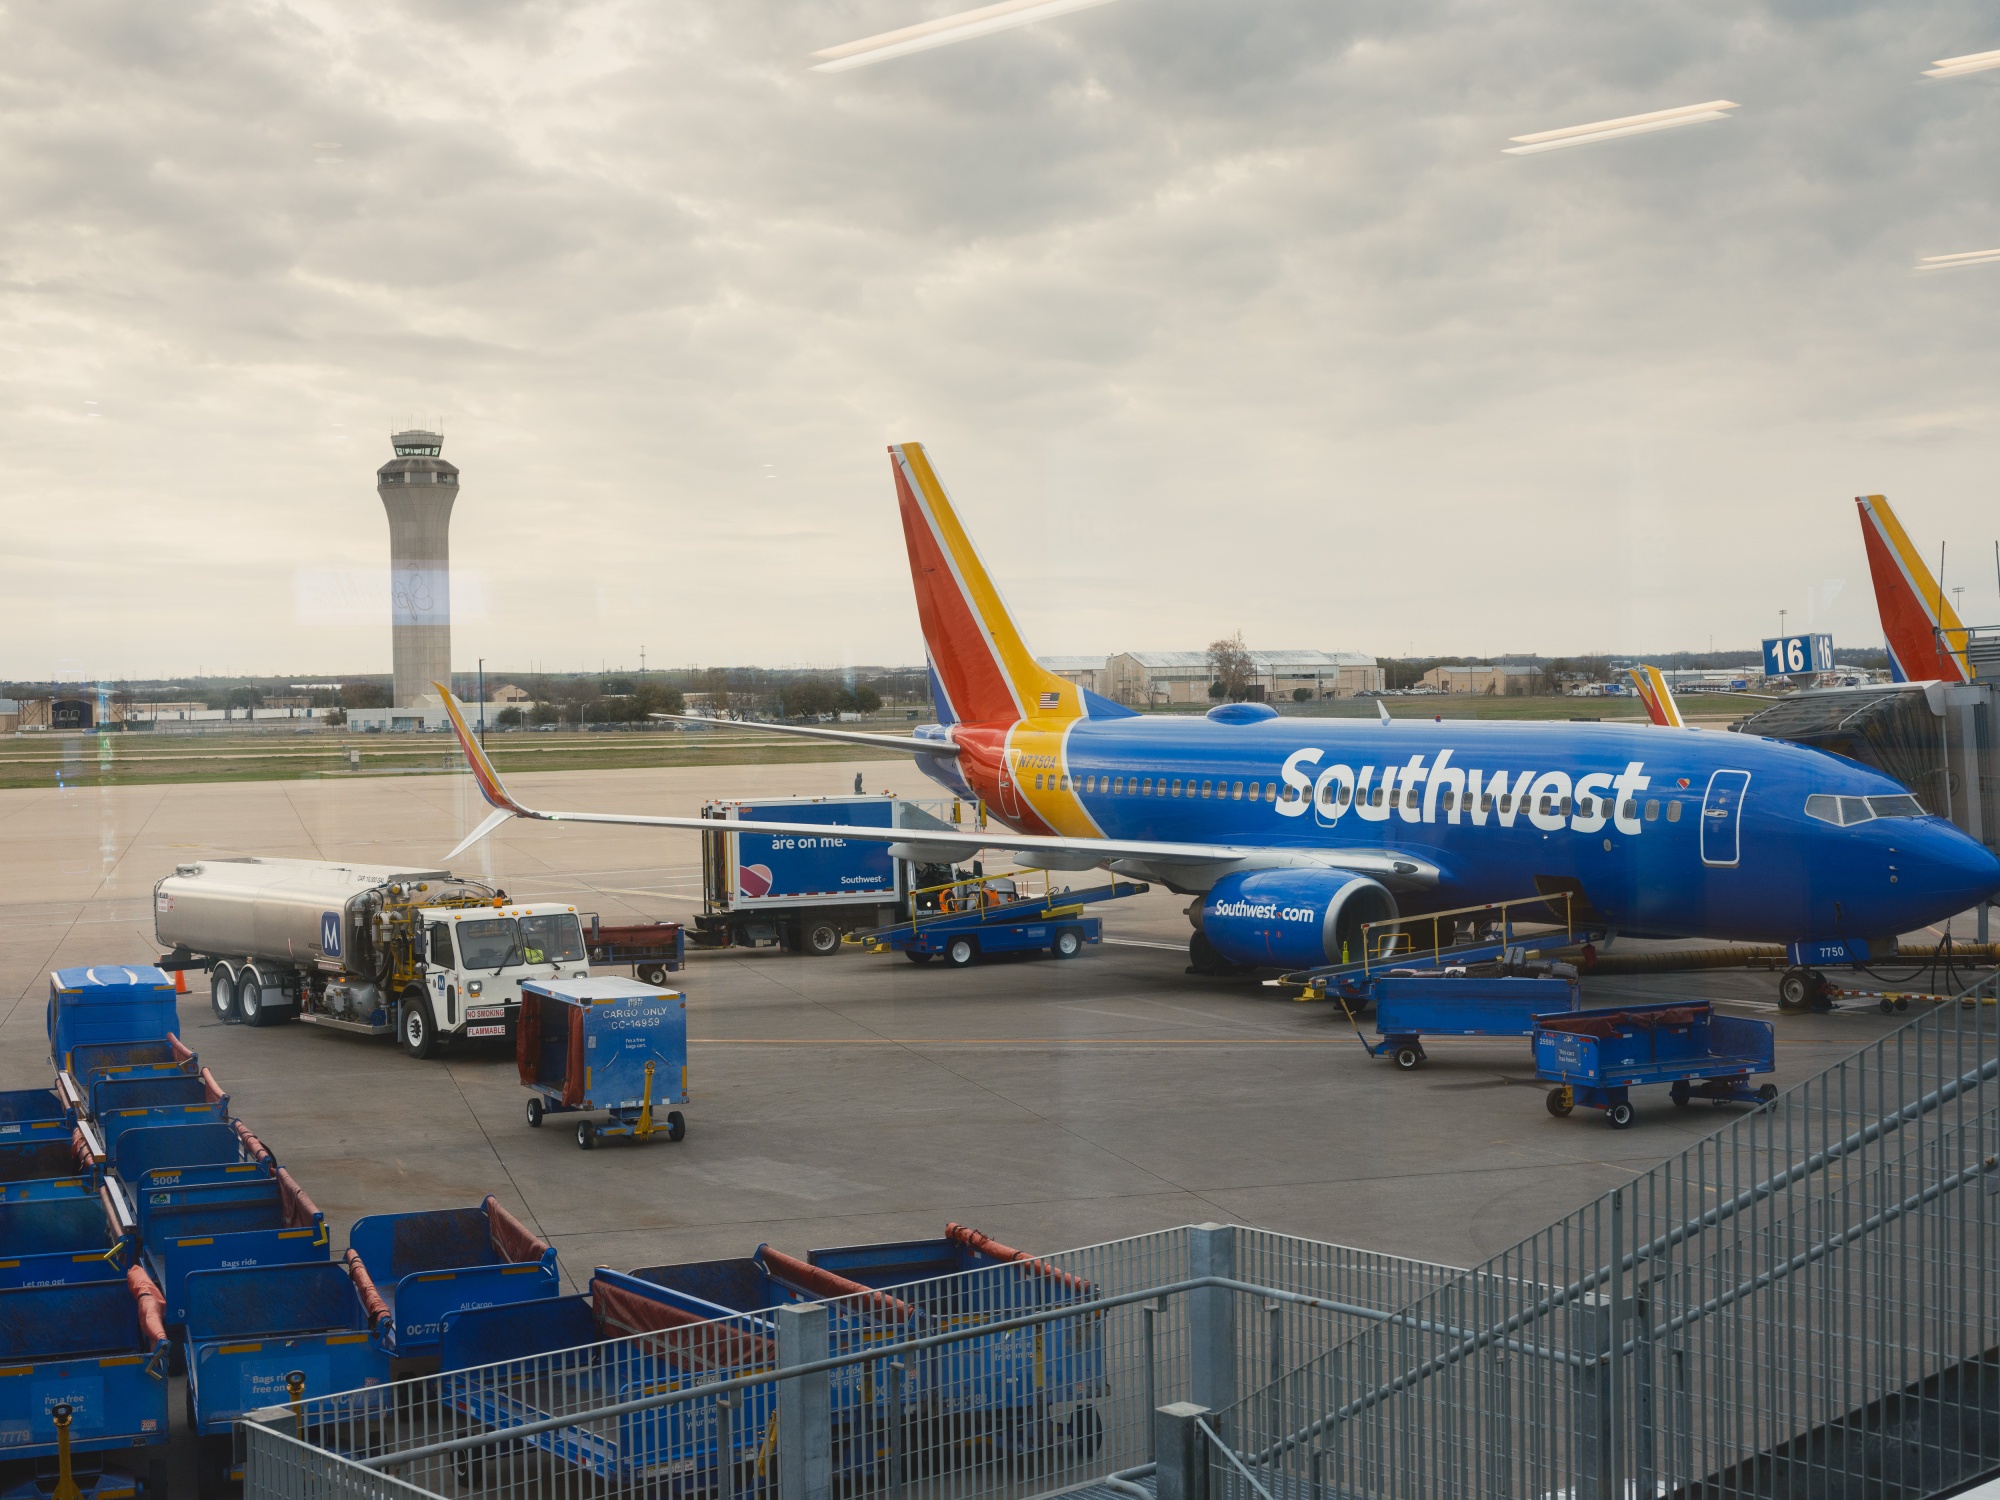 Southwest, other US airlines face holiday travel test after 2022